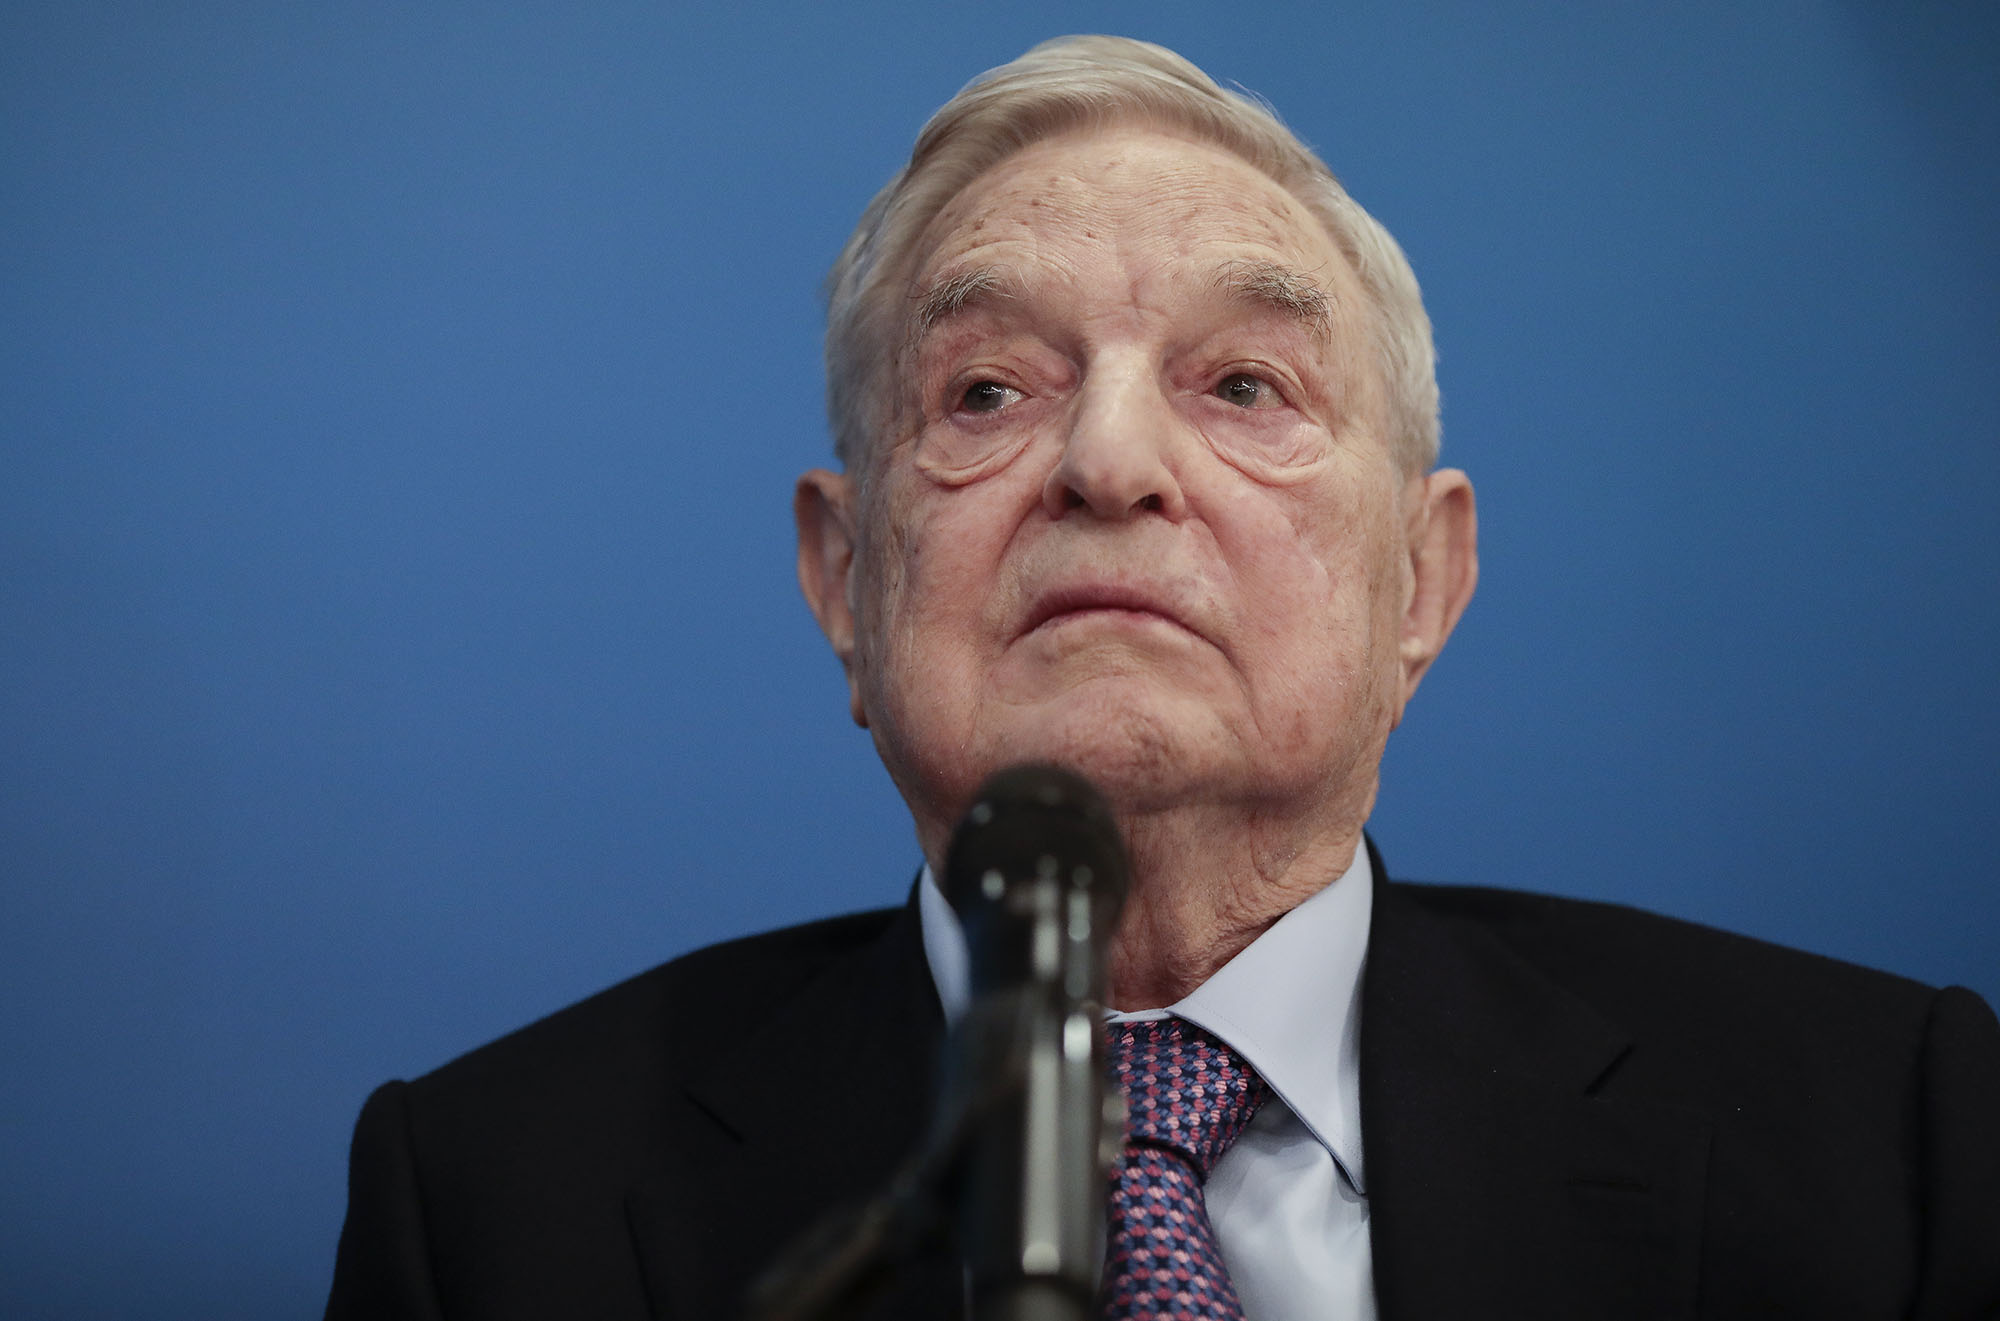 George Soros, billionaire and founder of Soros Fund Management LLC, pauses during an interview.
